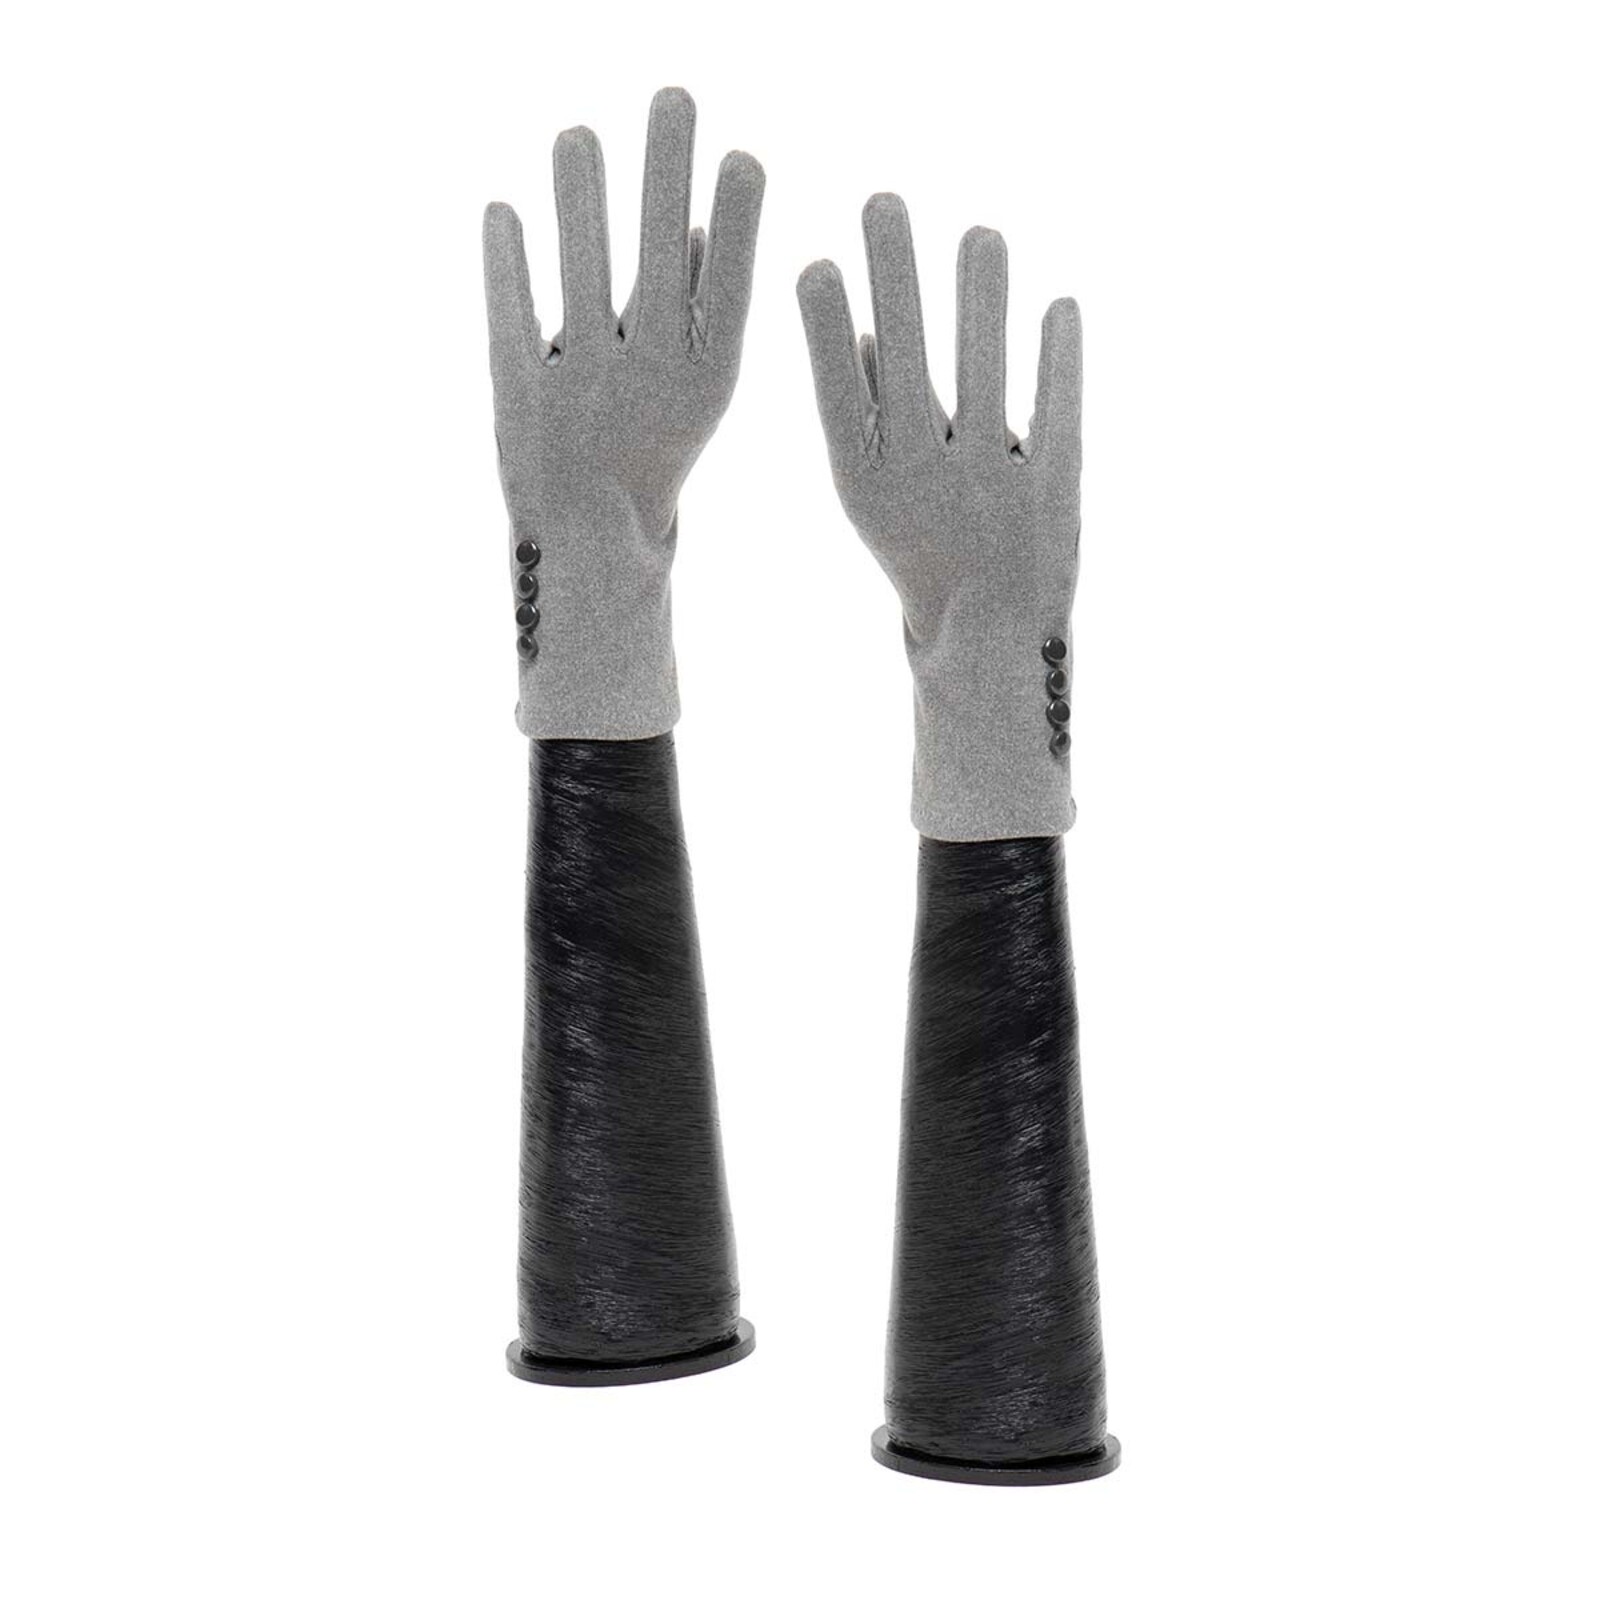 Meravic Grey Gloves with Buttons   X8045 loading=